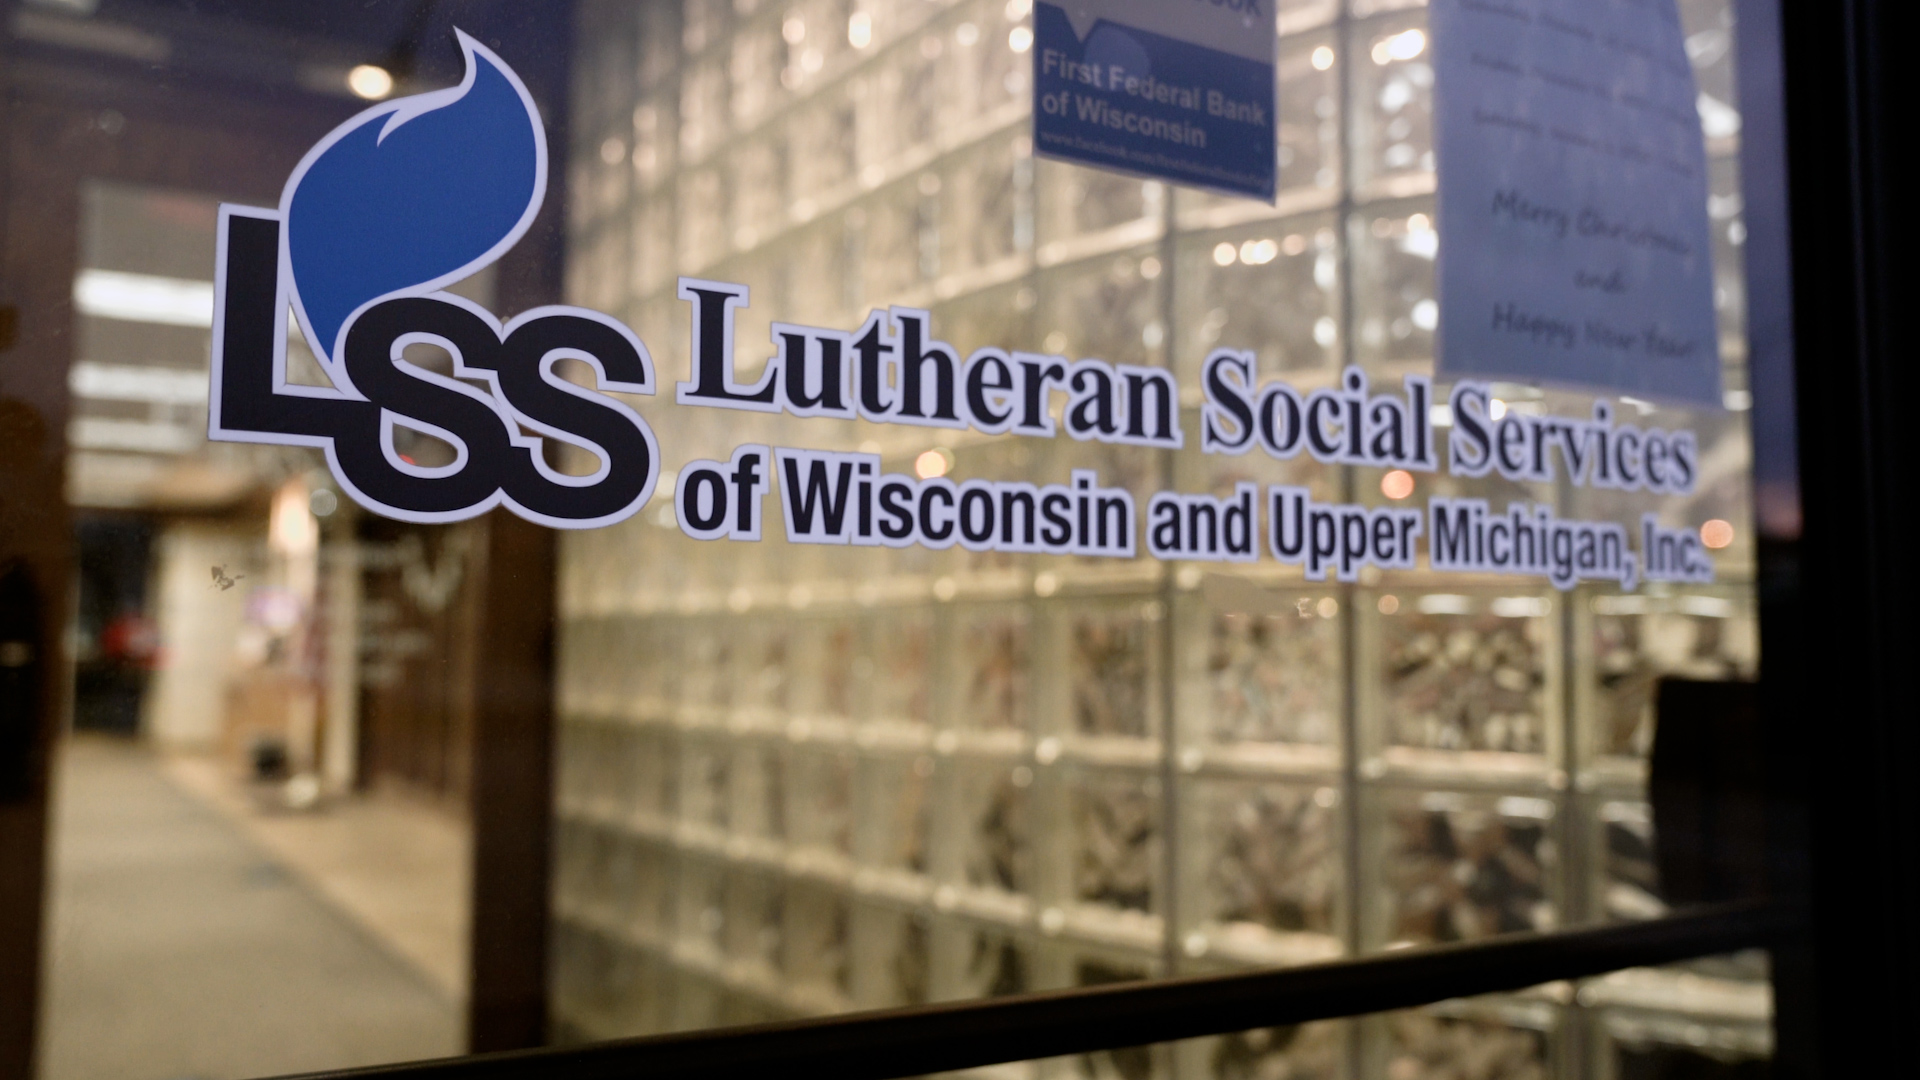 A painted door sign stencil reads "Lutheran Social Services of Wisconsin and Upper Michigan, Inc."